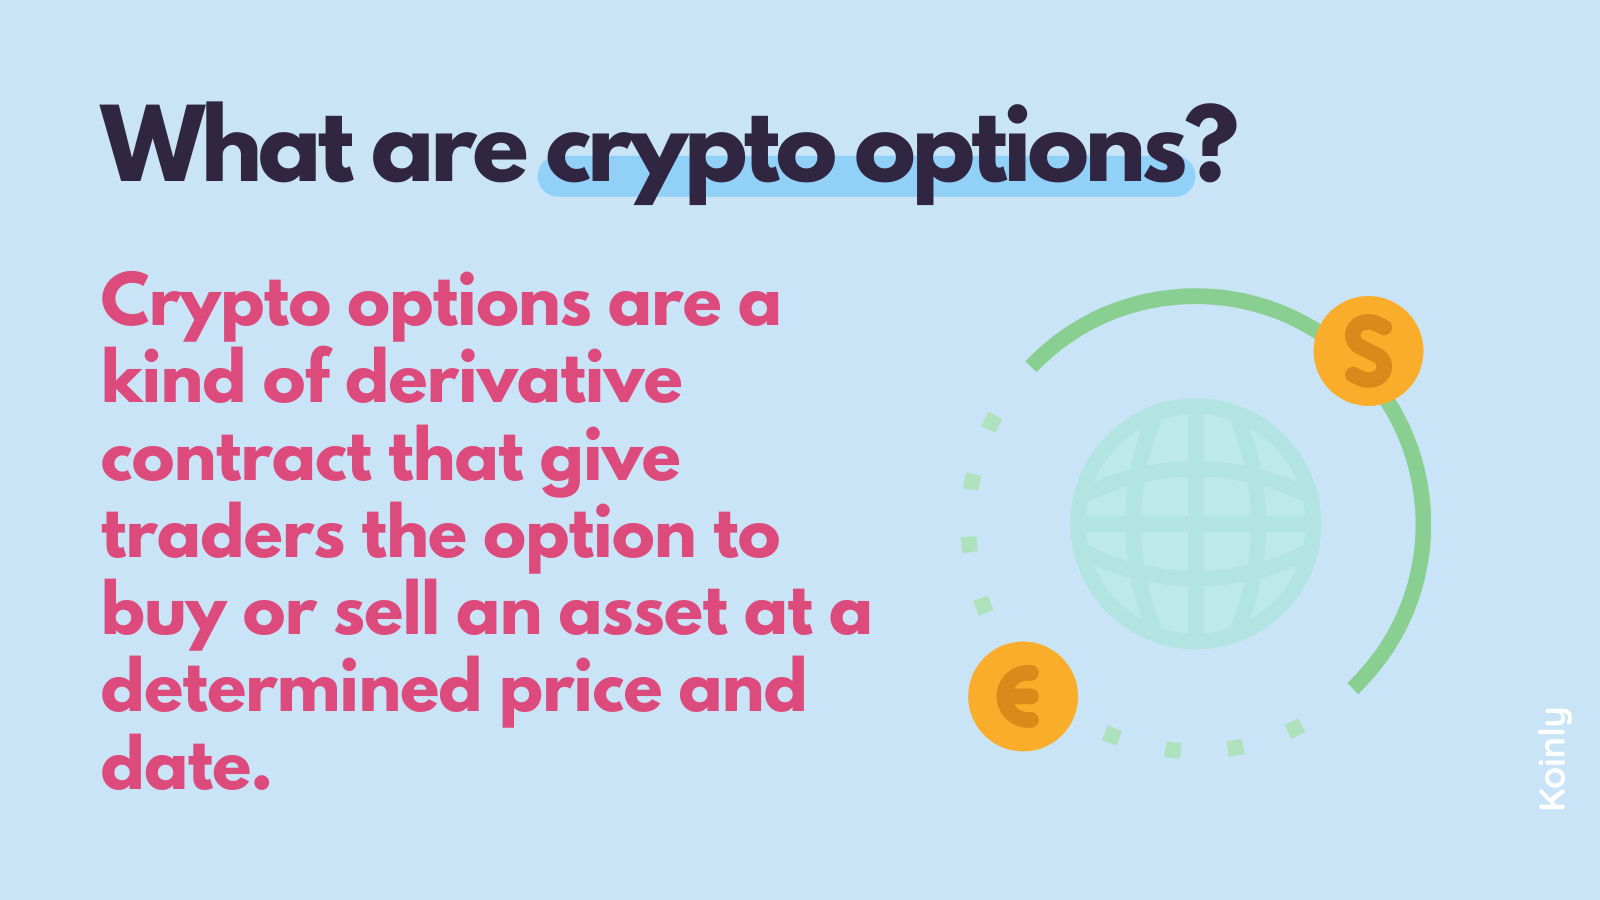 What are crypto options?